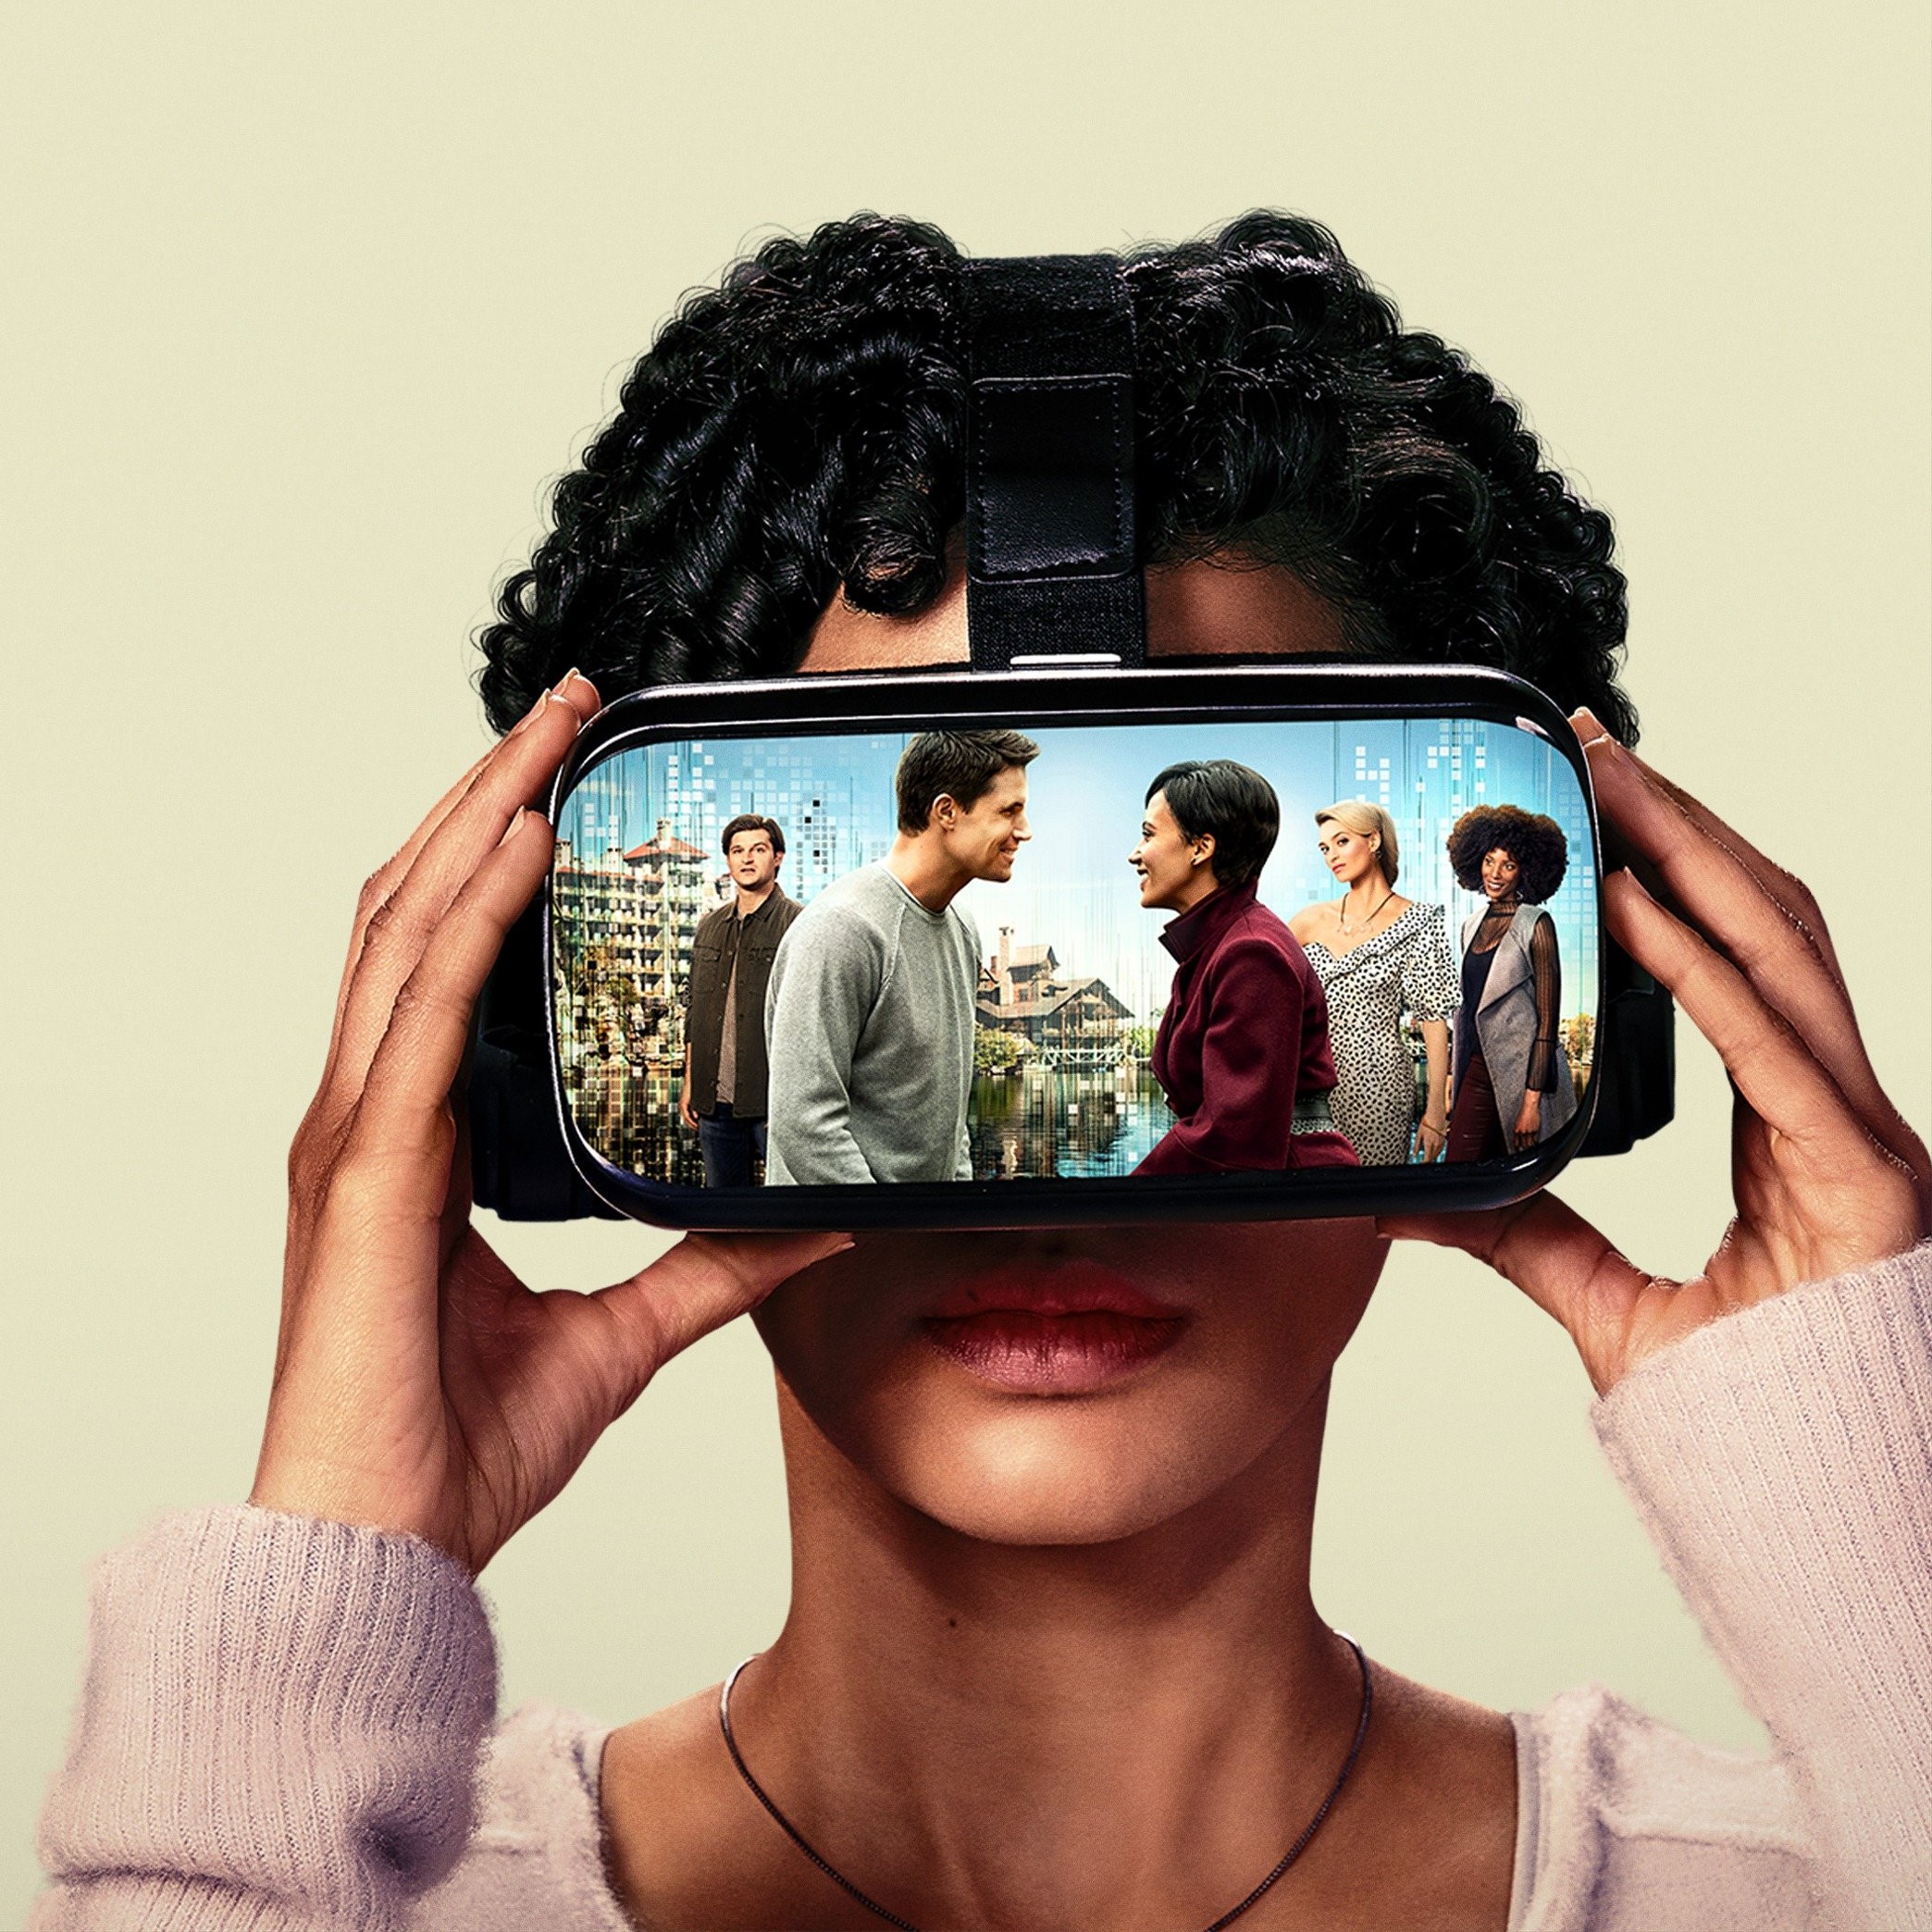 Image of a woman looking into a Virtual Reality Headset, which is showing a picture of two people meeting face to face.